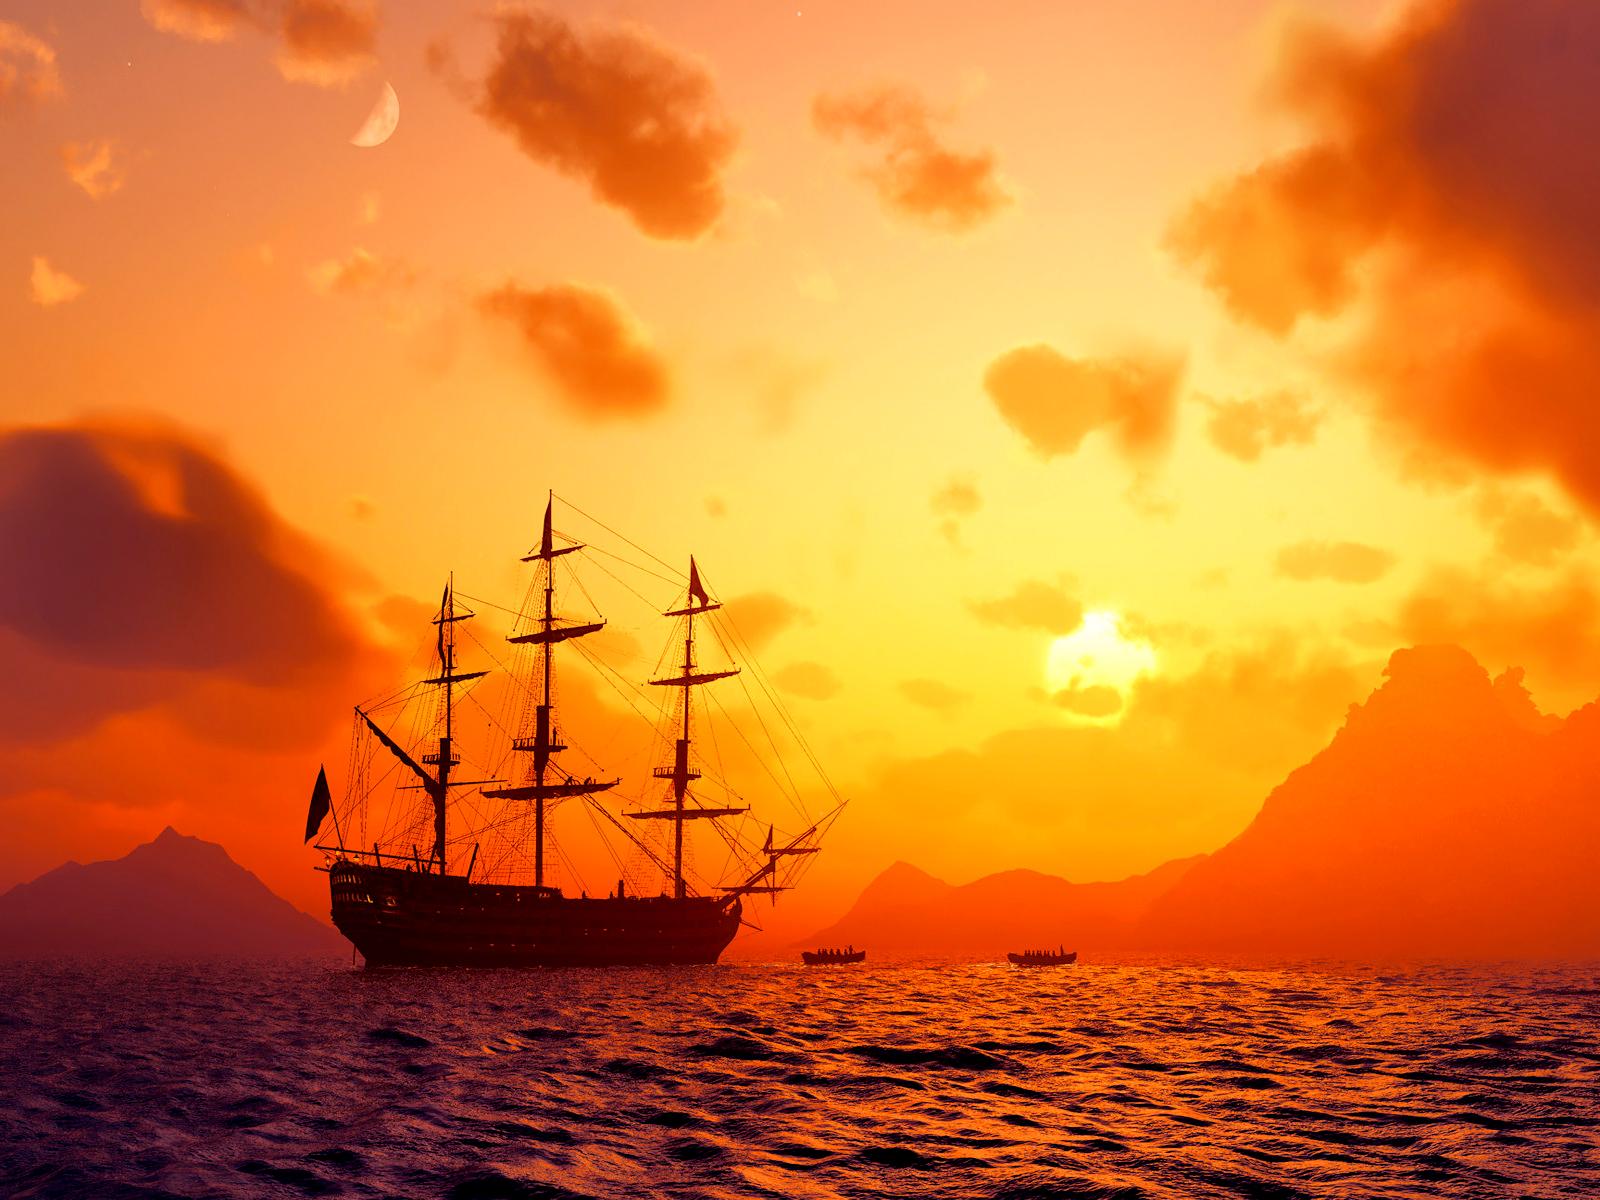 Expedition Party Old Sea Galleon Wallpaper Romney Conservatism